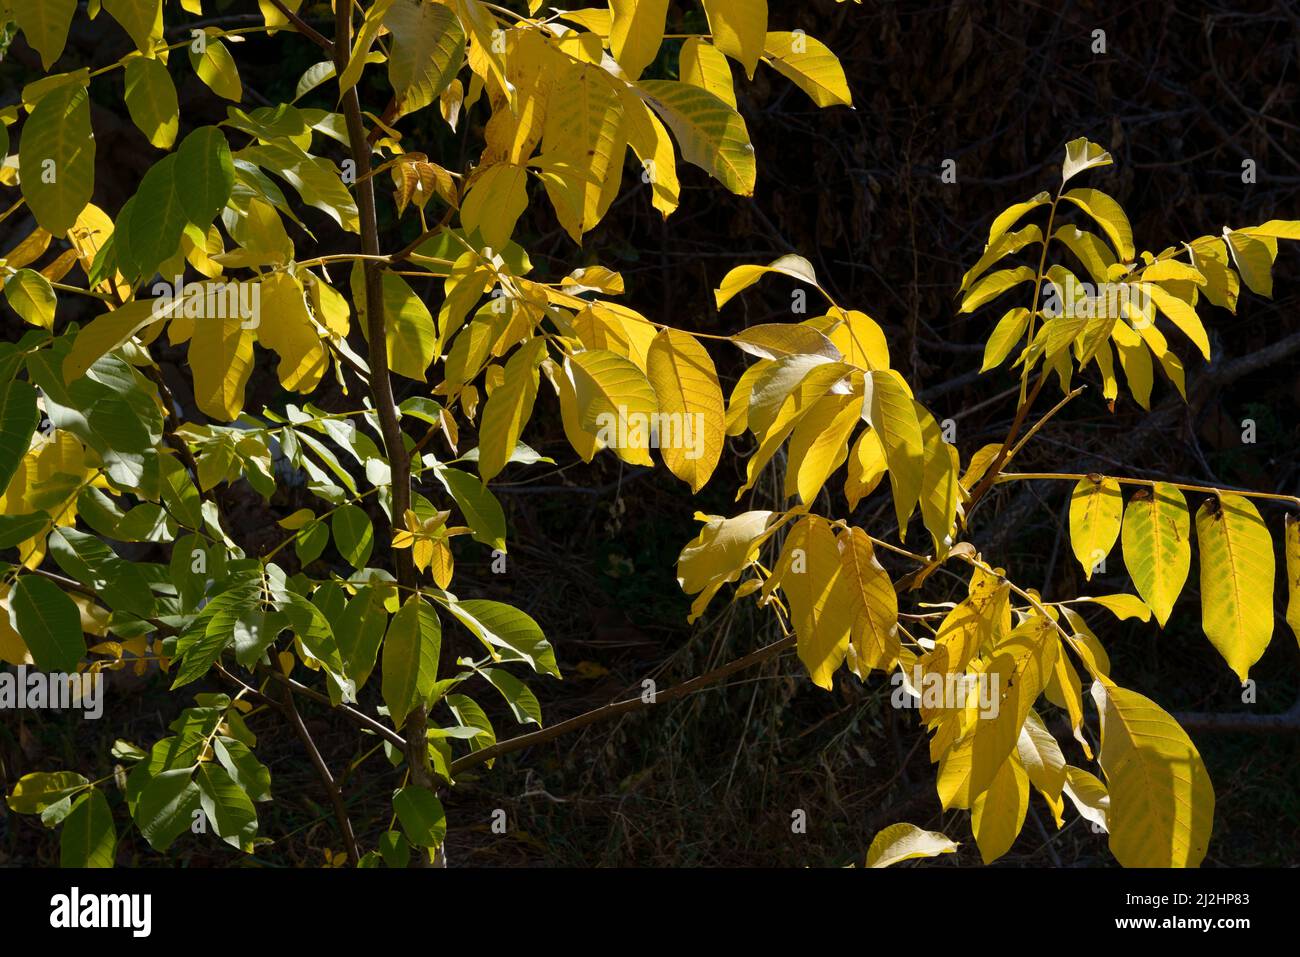 Close-up yellow and green leaves on branchlets of young walnut-tree in backlit of autumn sunlight. Stock Photo